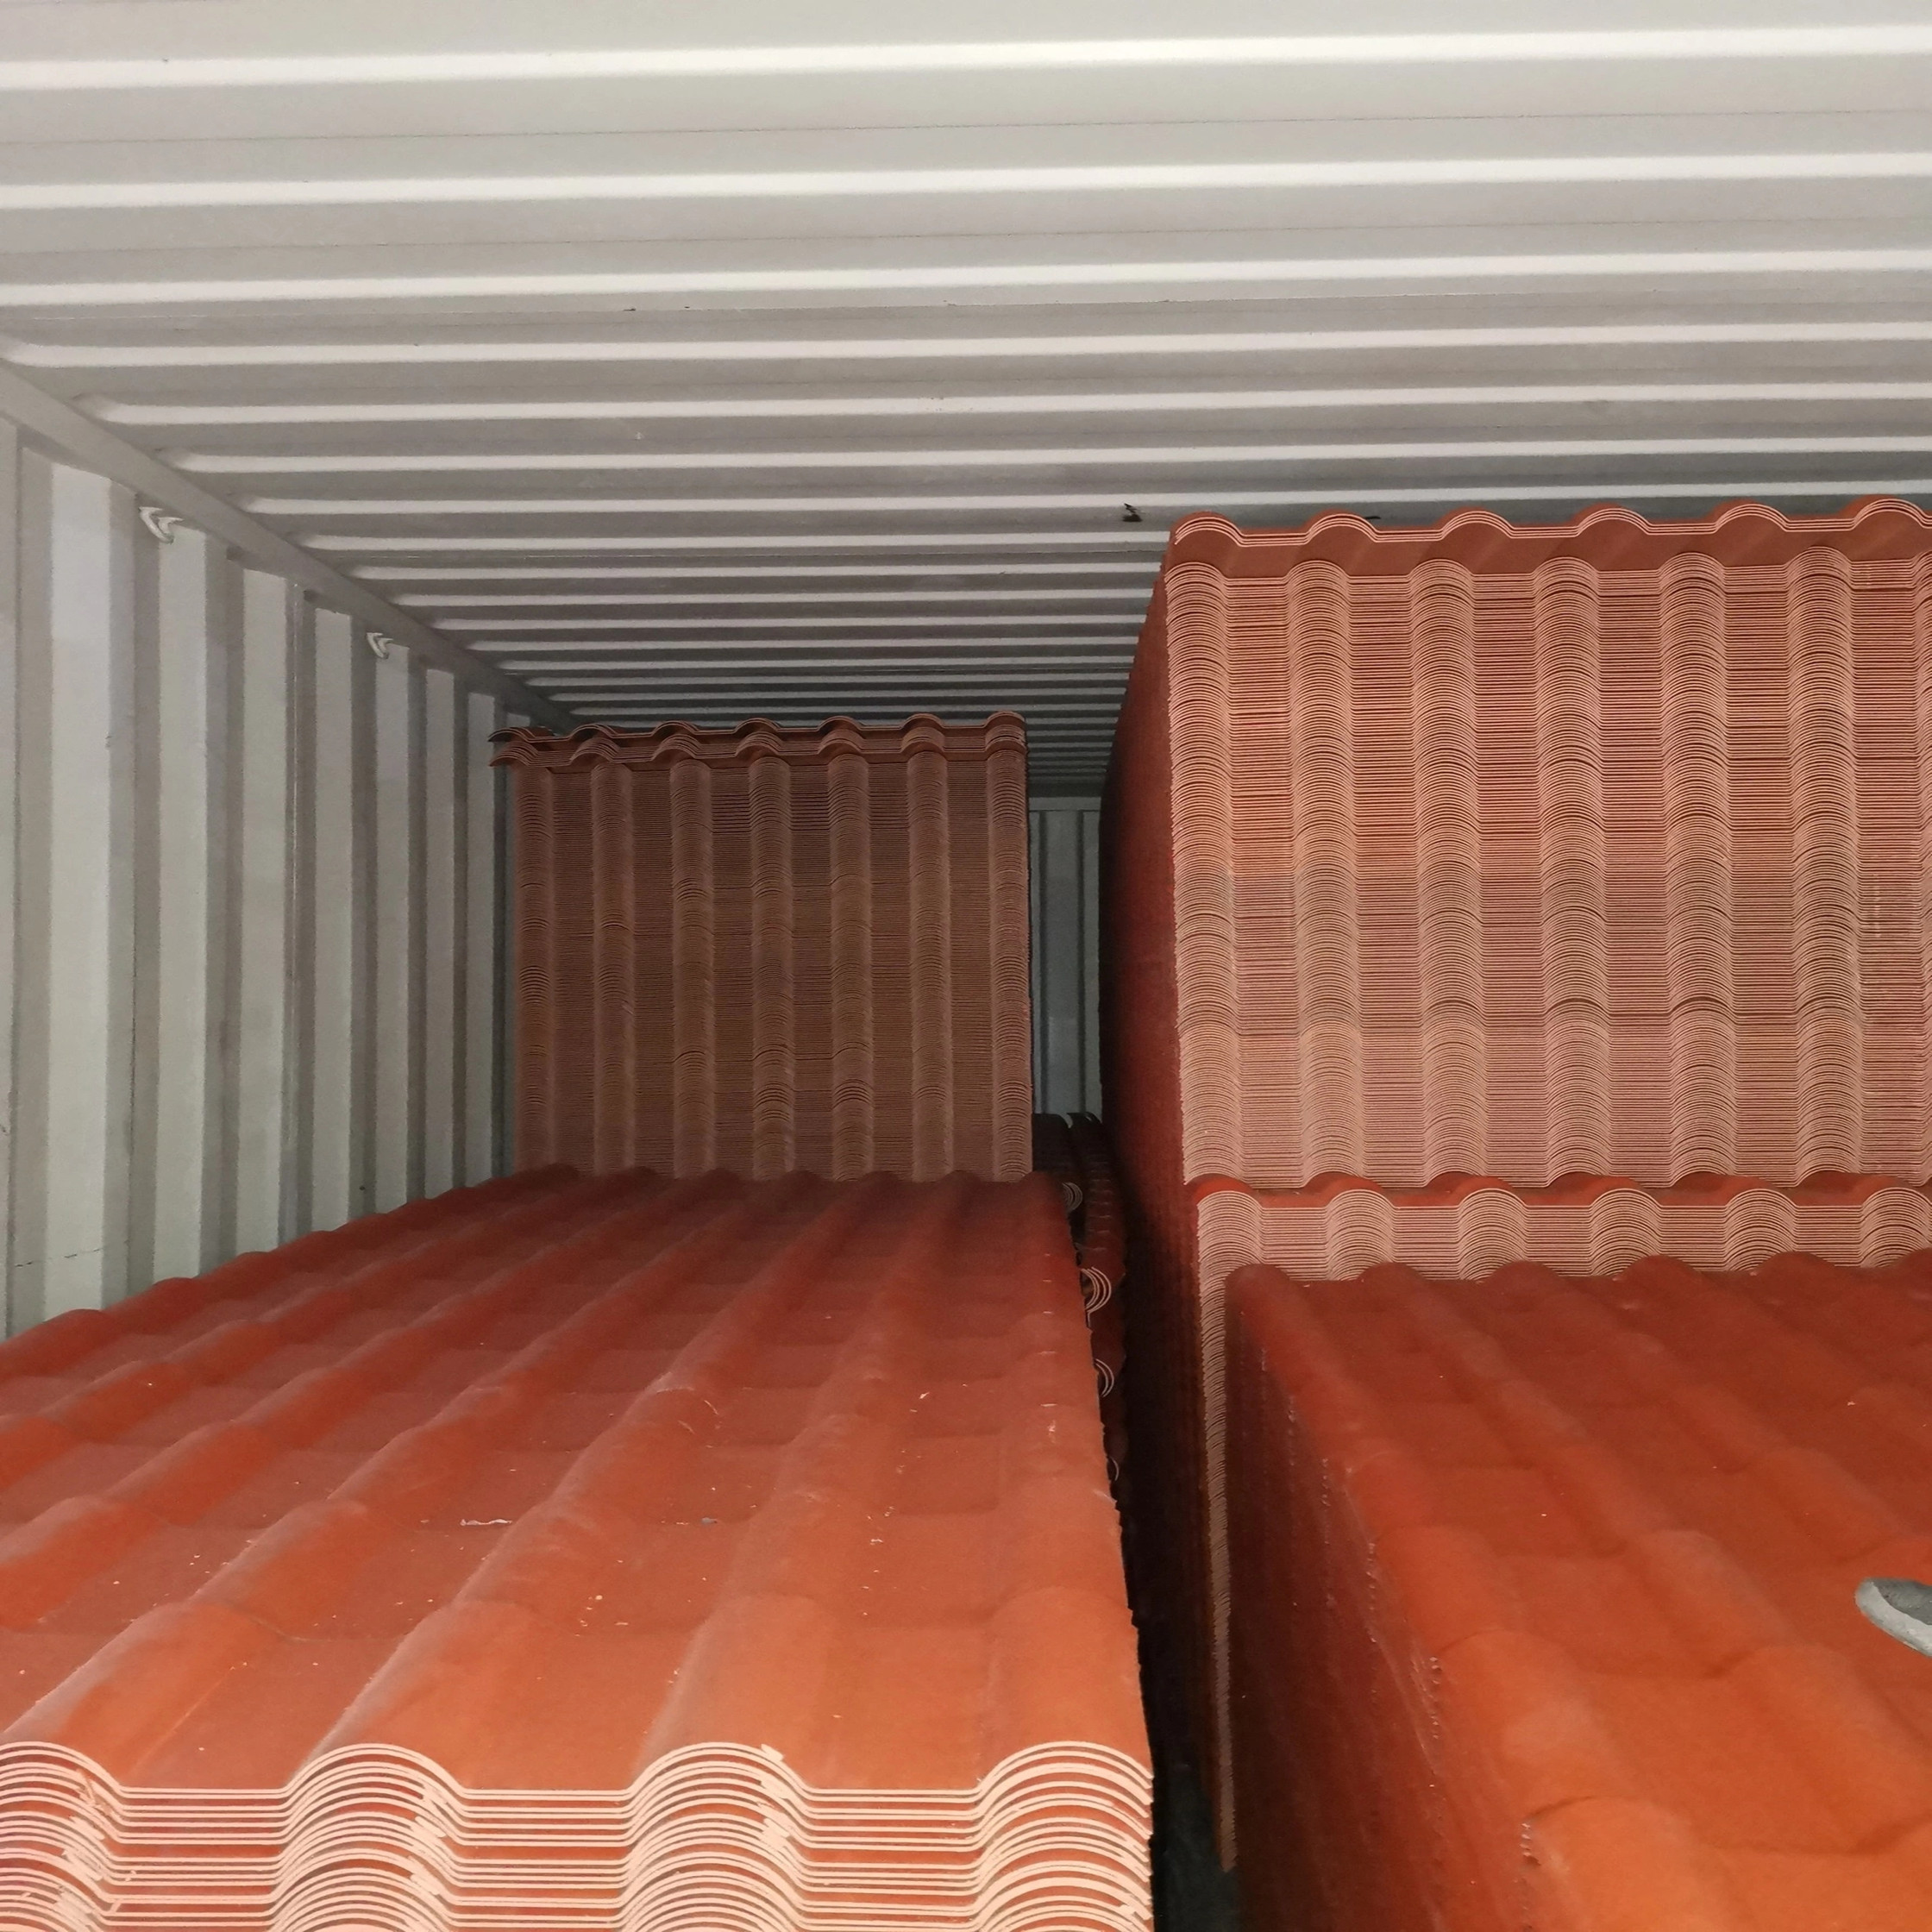 PVC ROOF Tiles production is completed, ready to ship the goods